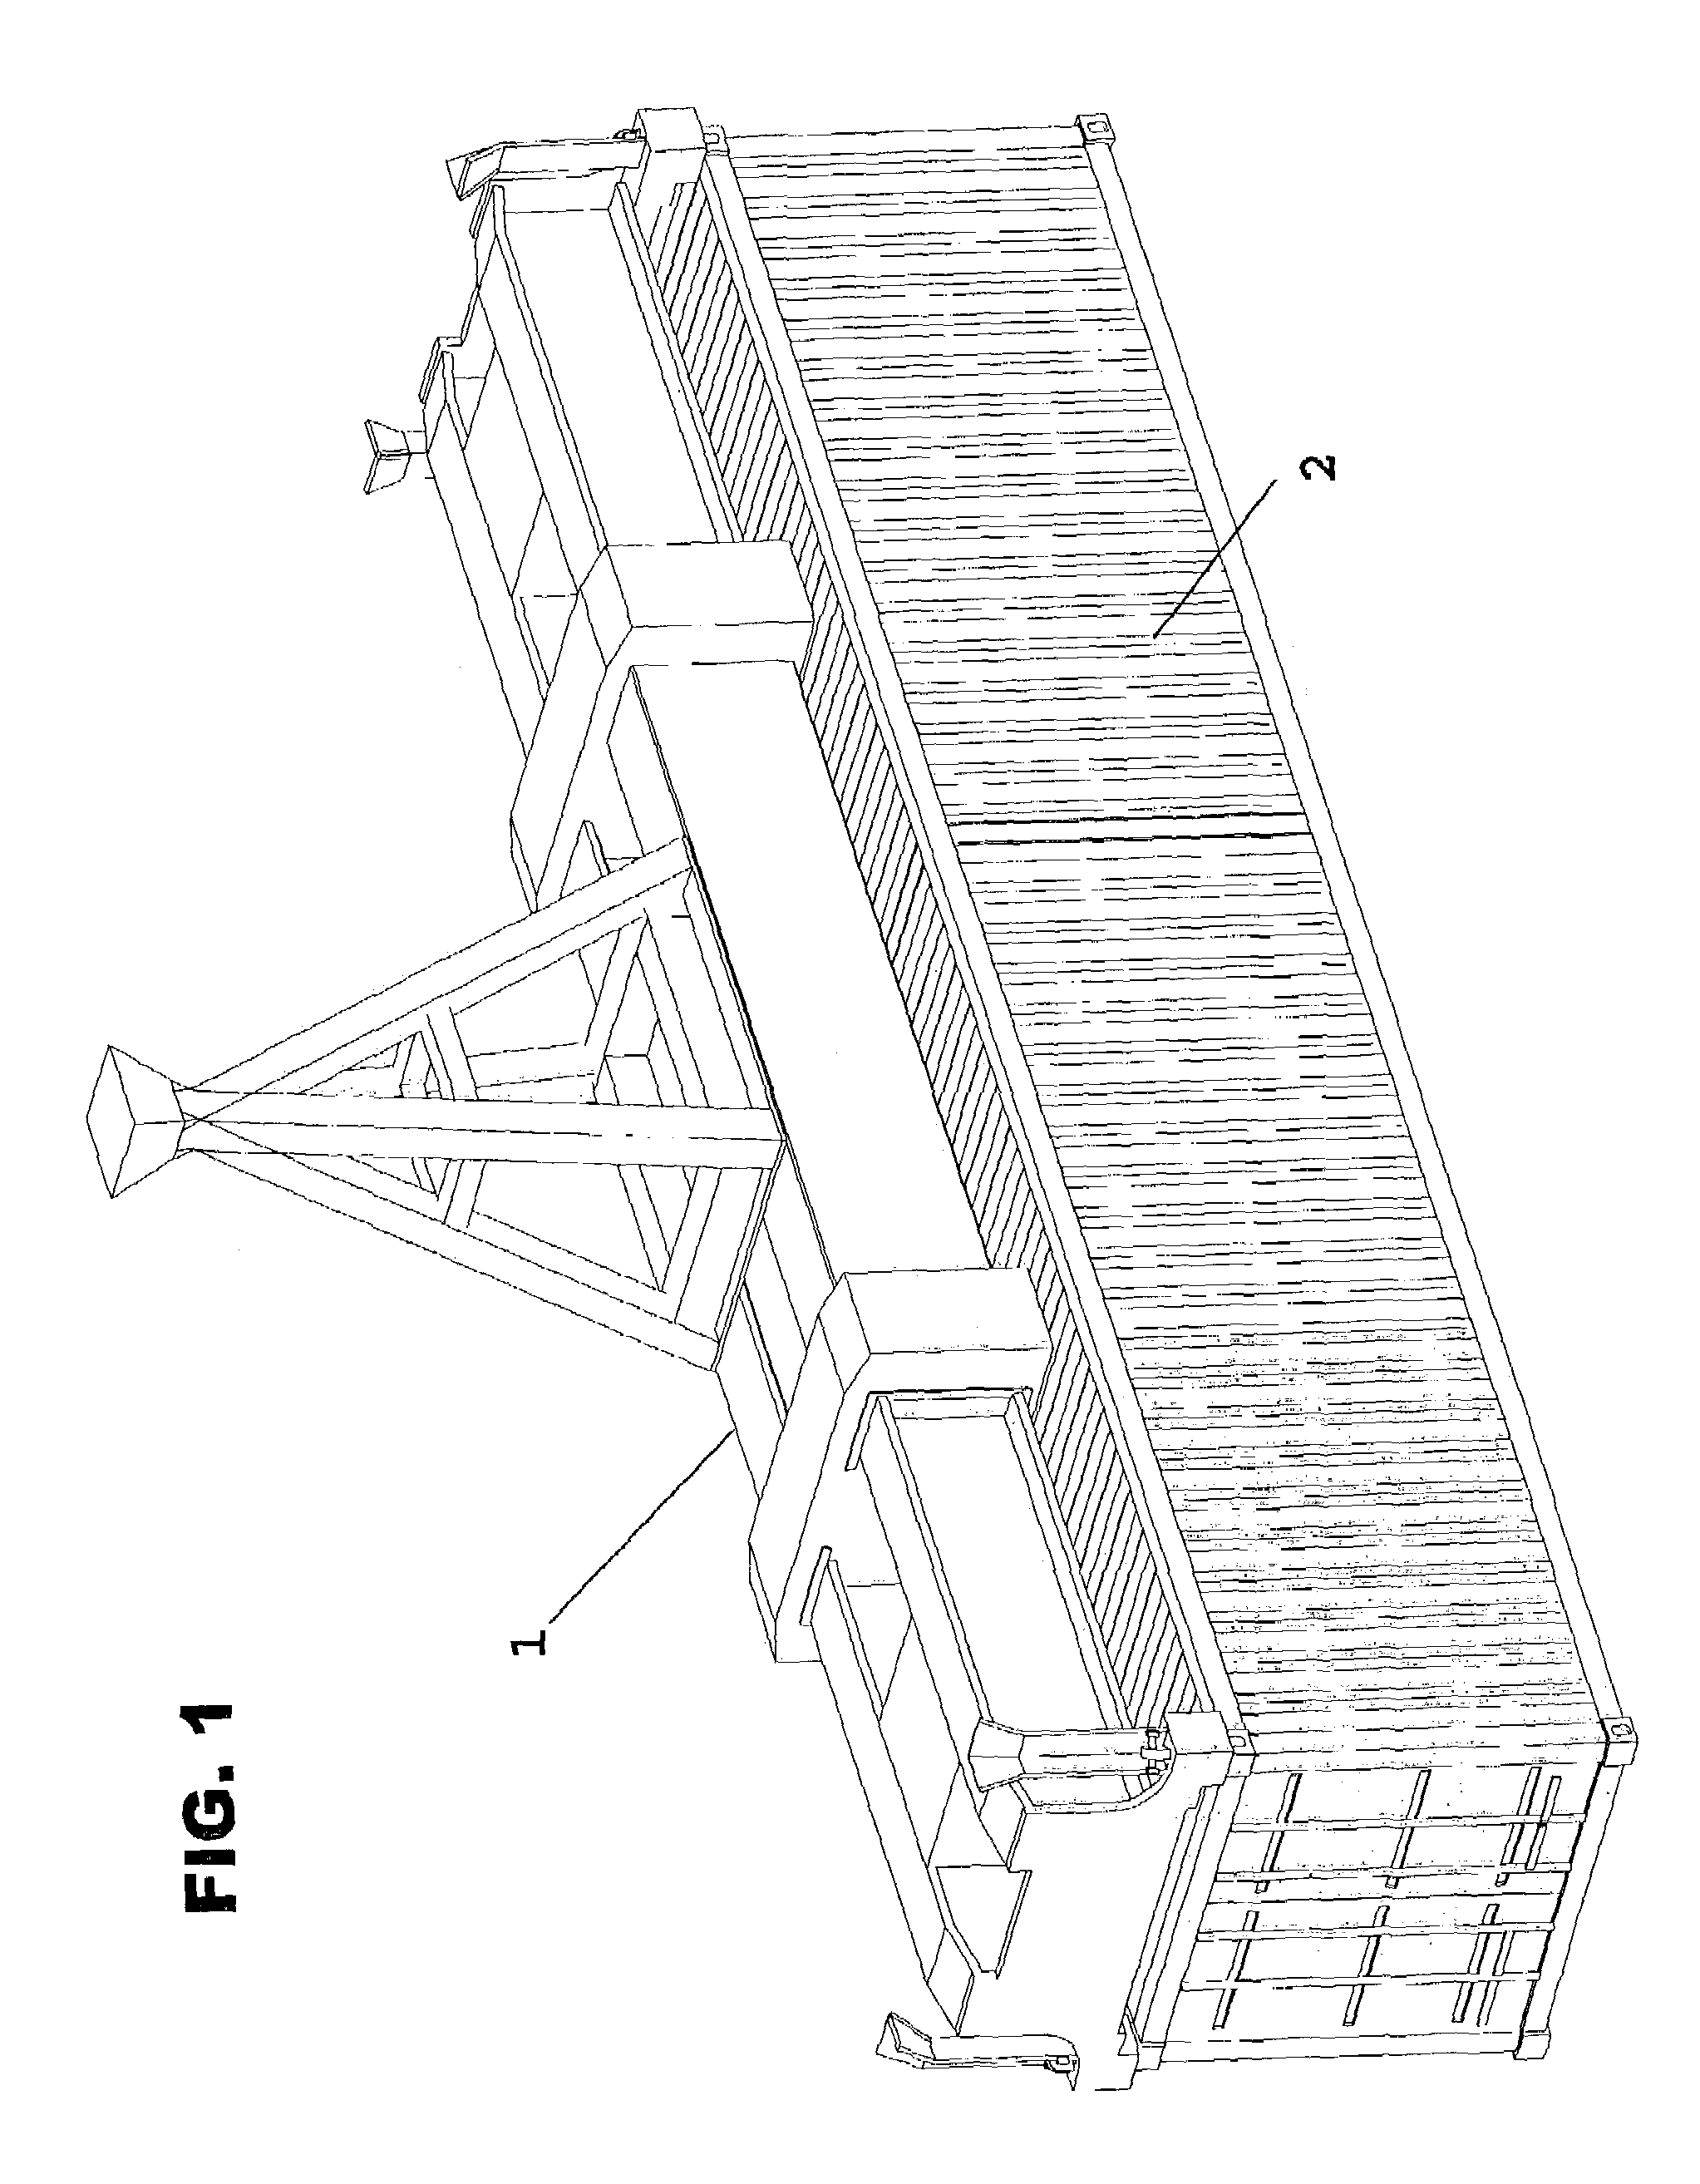 Apparatus and method for detecting radiation or radiation shielding in containers